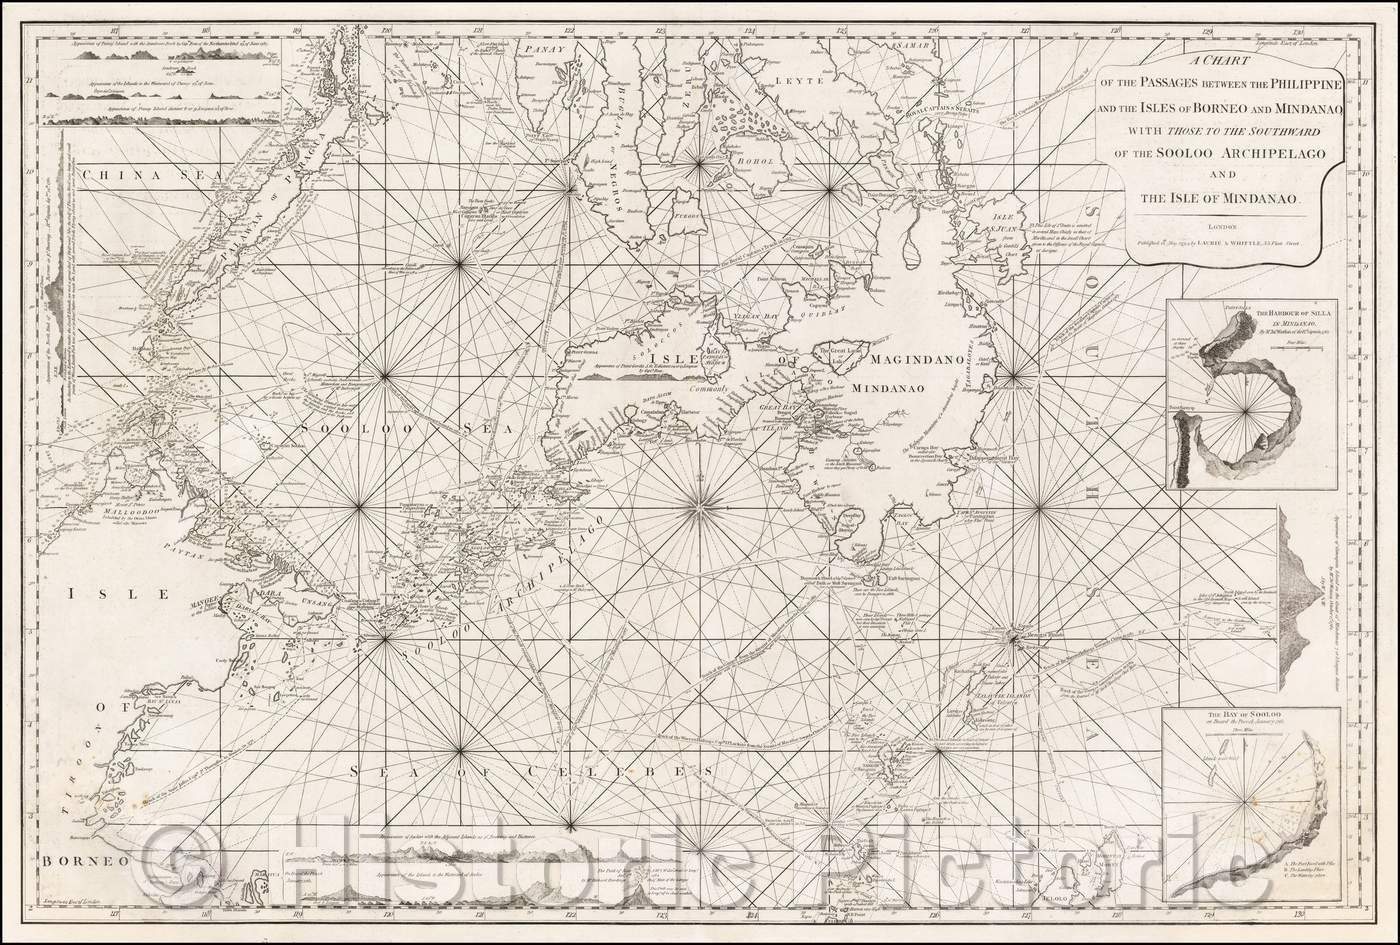 Historic Map - A Chart of the Passages Between The Philippine and the Isles of Borneo and Mindanao, 1794, Richard Holmes Laurie v2